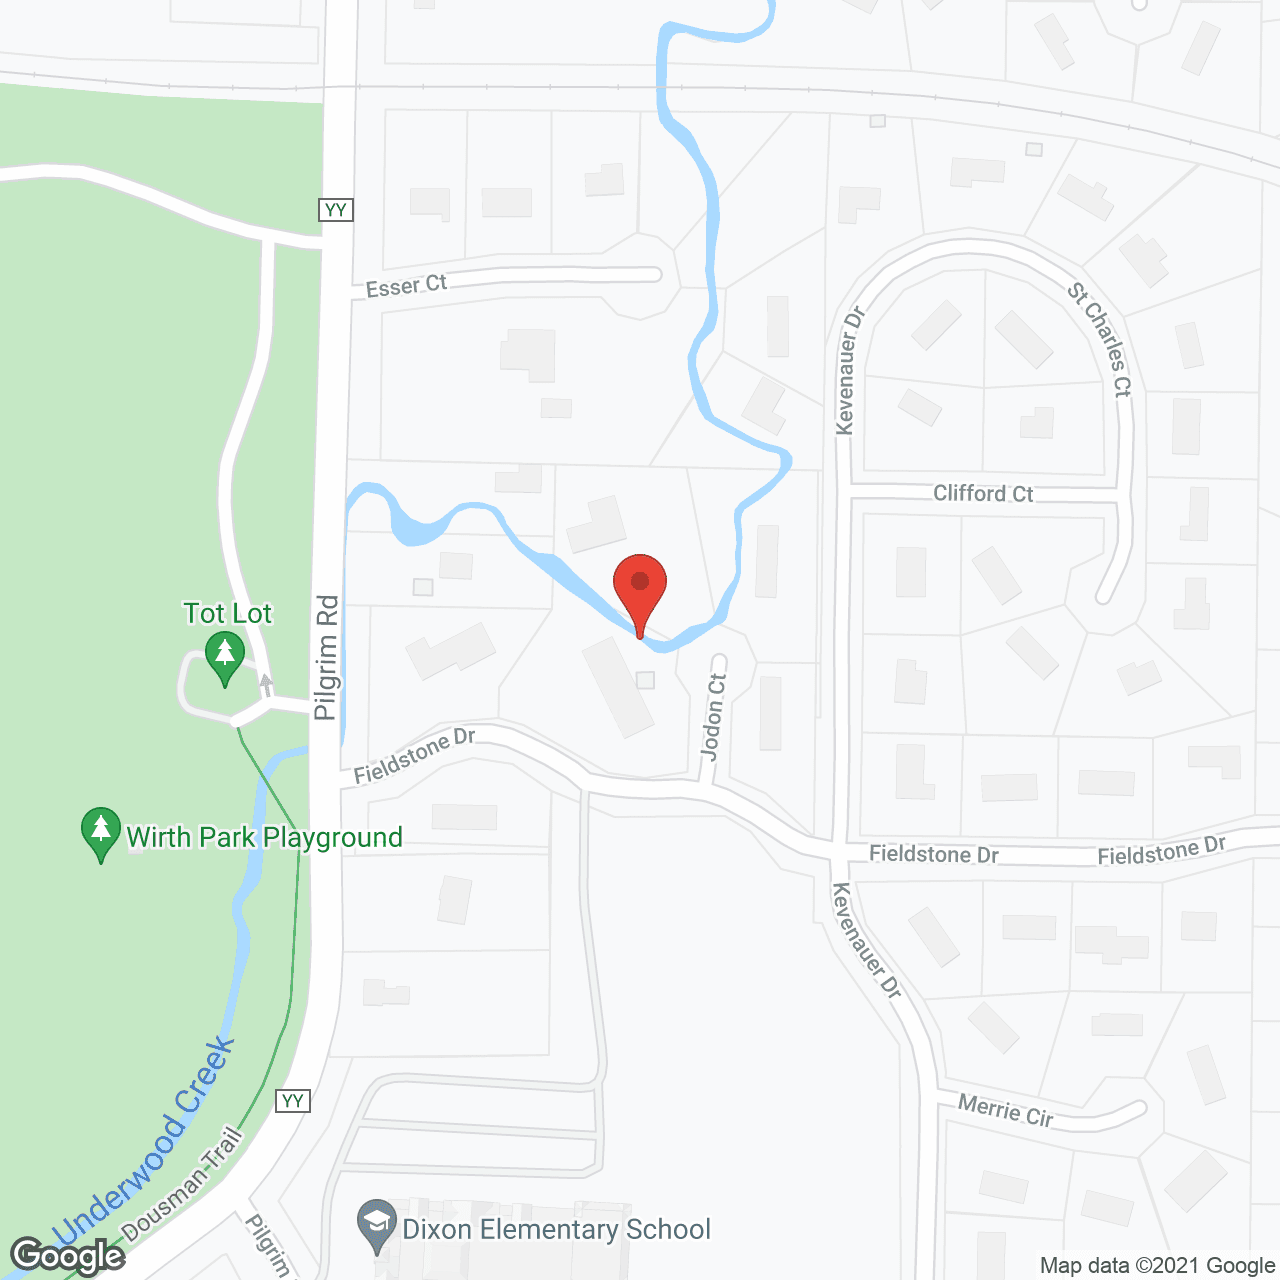 Hotel Lifestyle Senior Living - Brookfield in google map